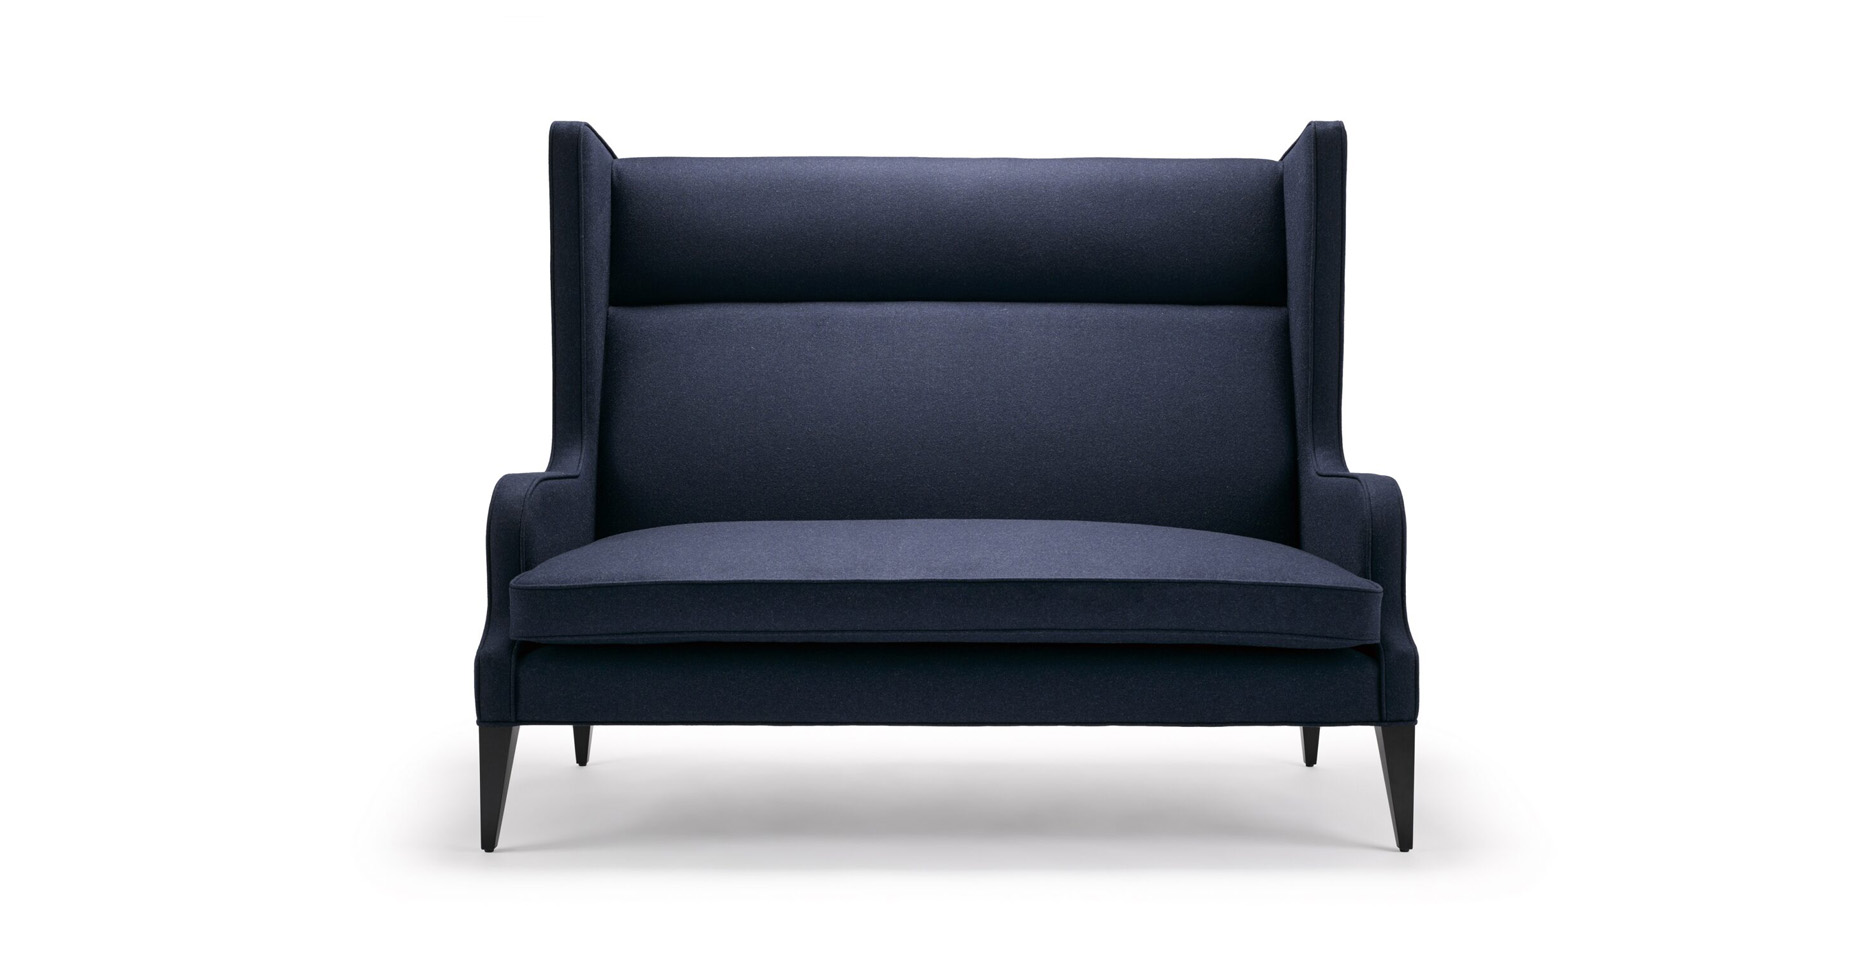 Alae Wing Sofa - Shown here upholstered in Casamance Arthur’s Seat navy wool, with legs in black lacquered walnut.